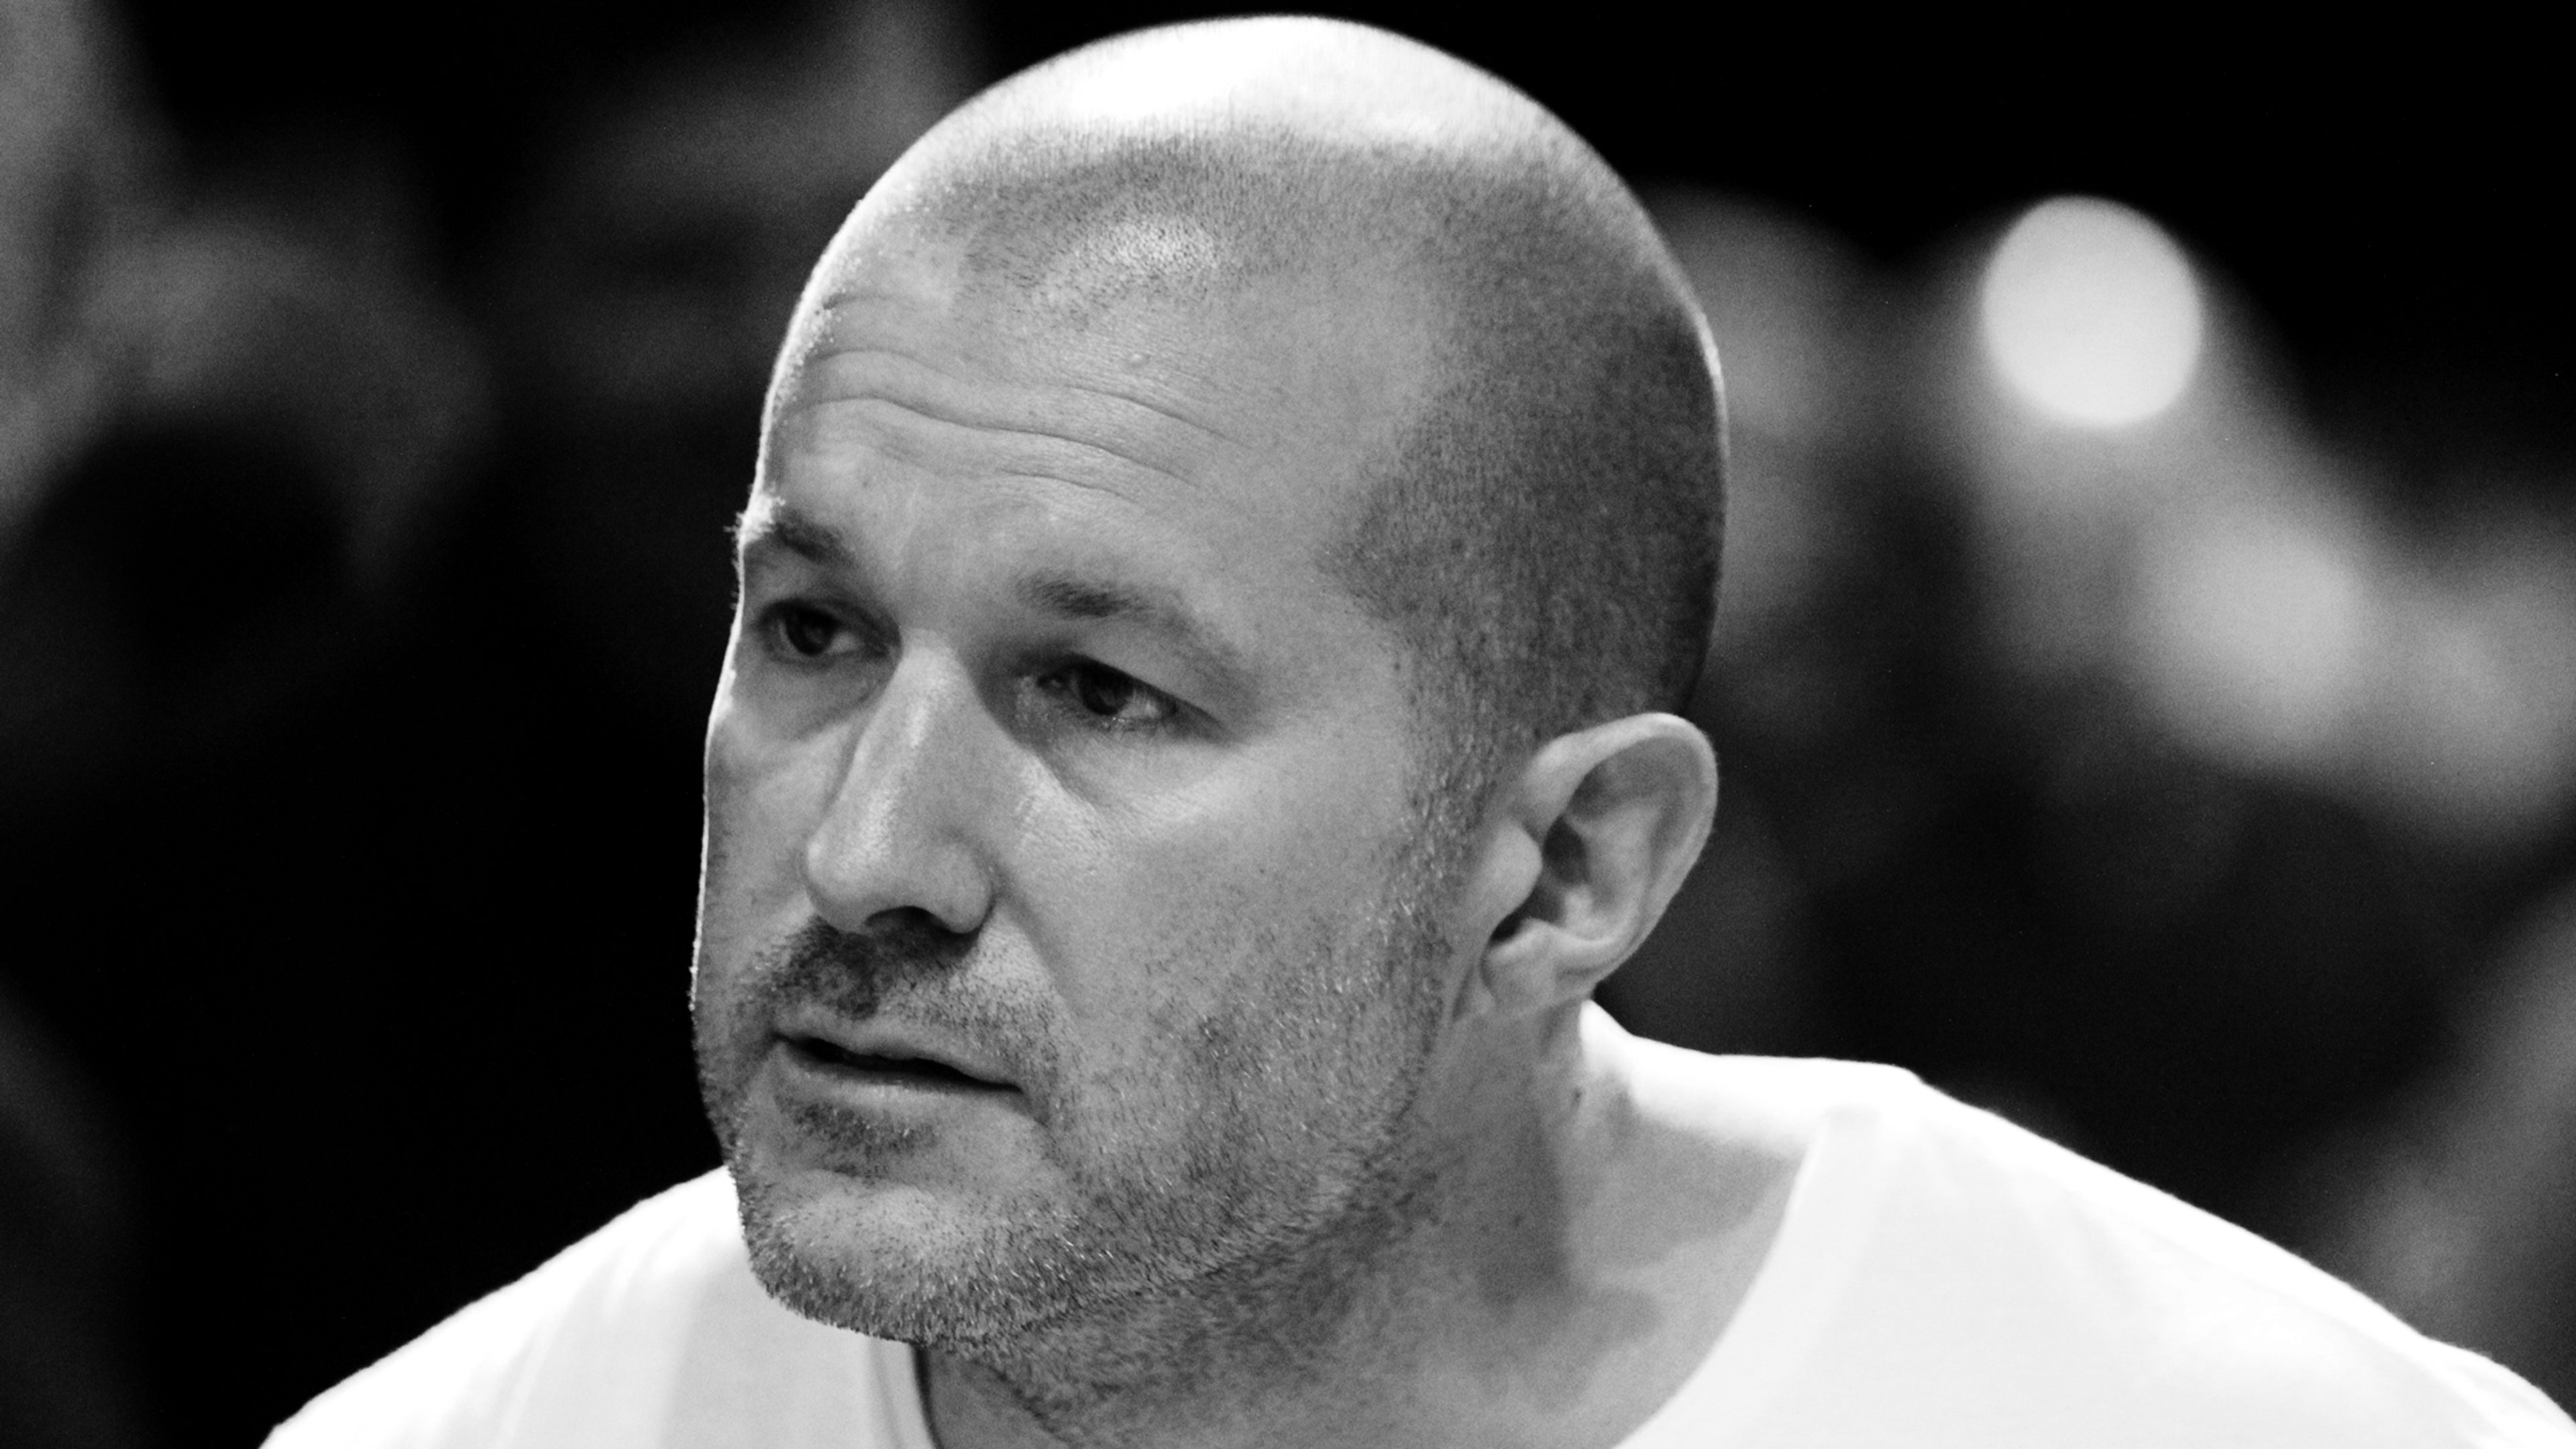 Report: Jony Ive checked out at Apple years ago